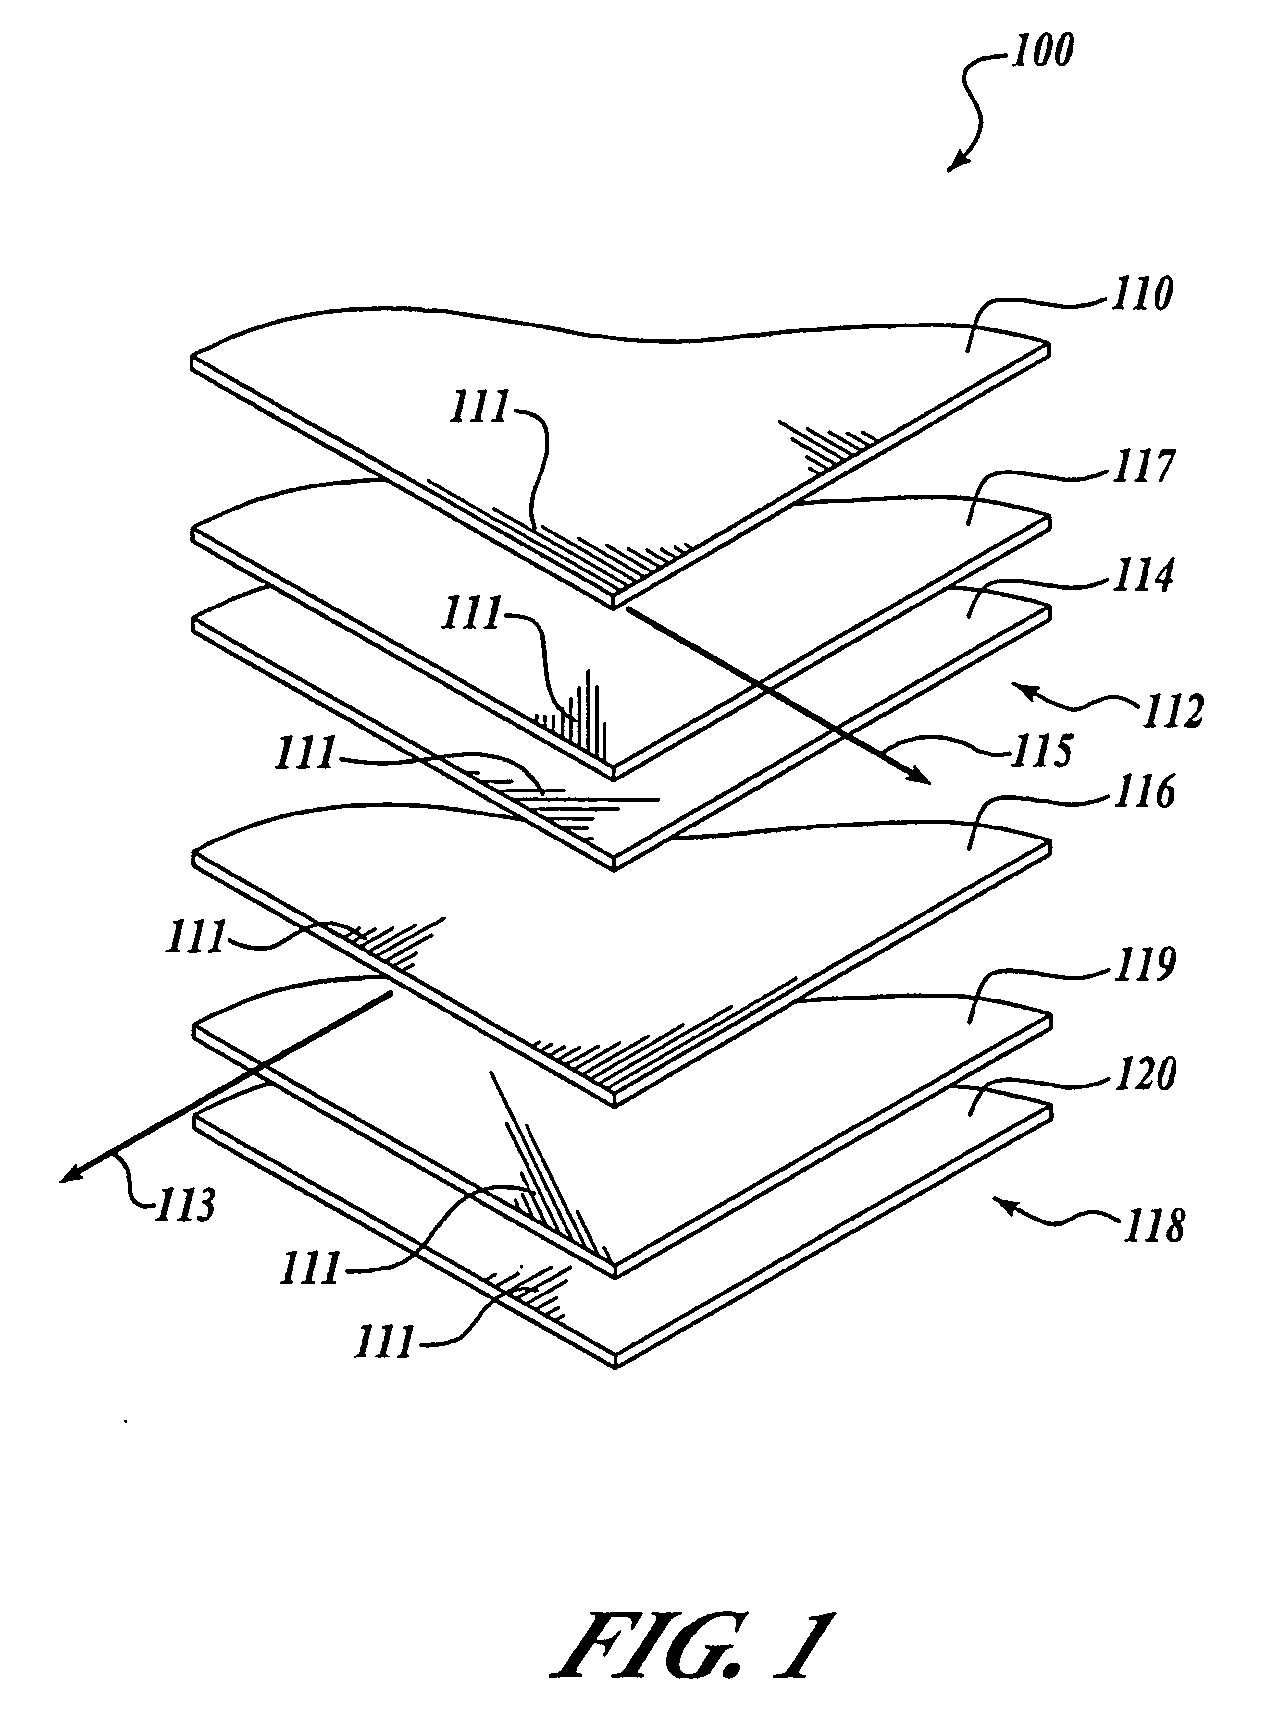 Multi-axial laminate composite structures and methods of forming the same